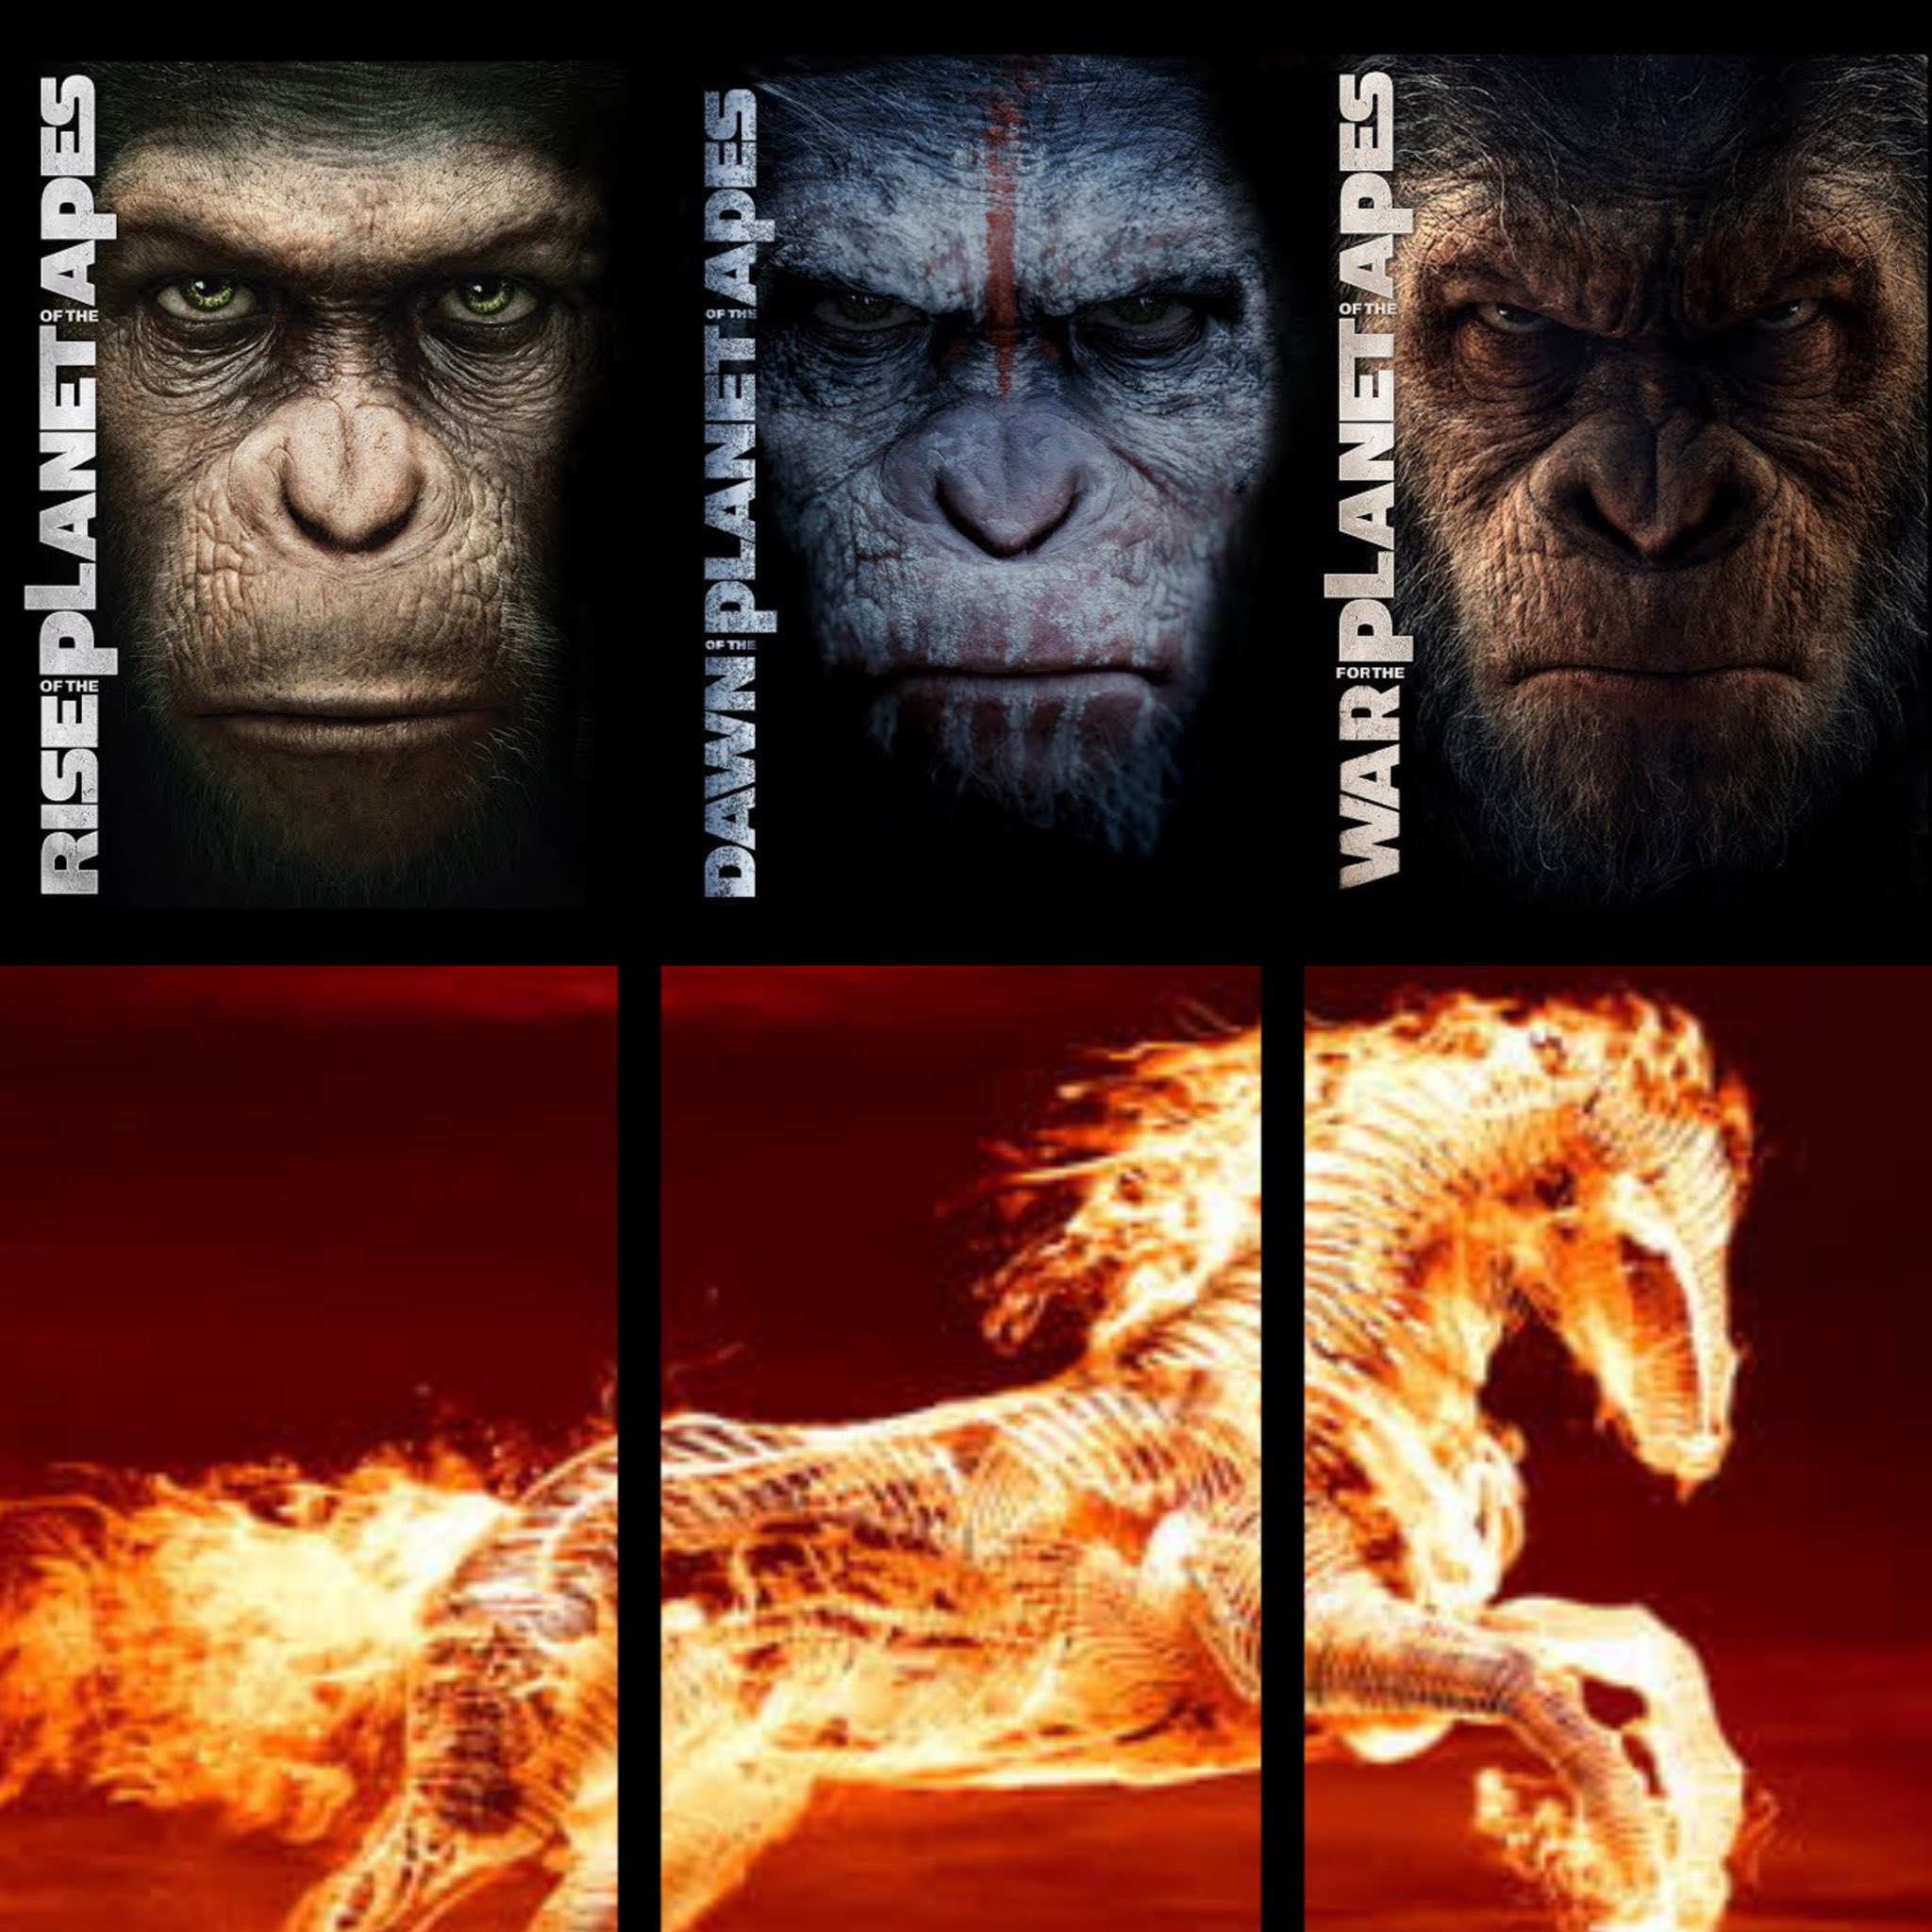 BLURAYANGEL 🦇 on X: "The PLANET OF THE APES trilogy is one of the greatest  trilogies of all time https://t.co/cjZsN3uPFE" / X